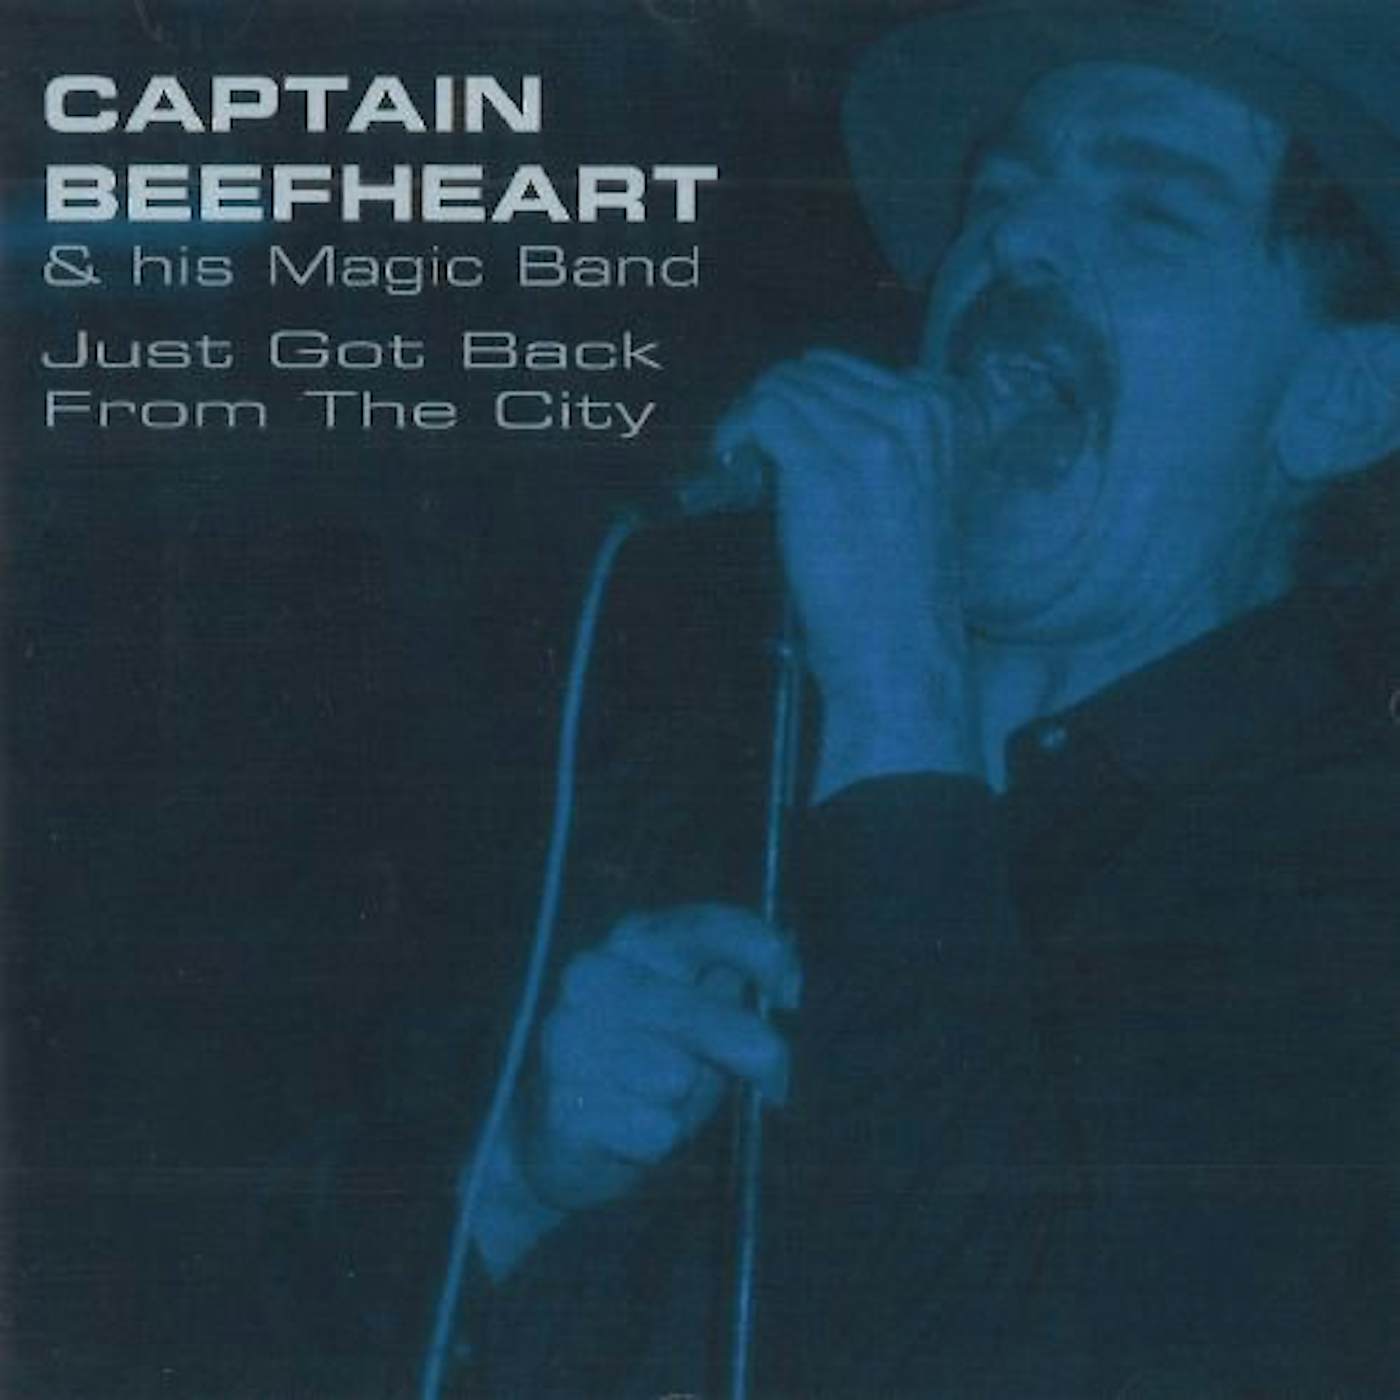 Captain Beefheart & His Magic Band JUST GOT BACK FROM THE CITY CD